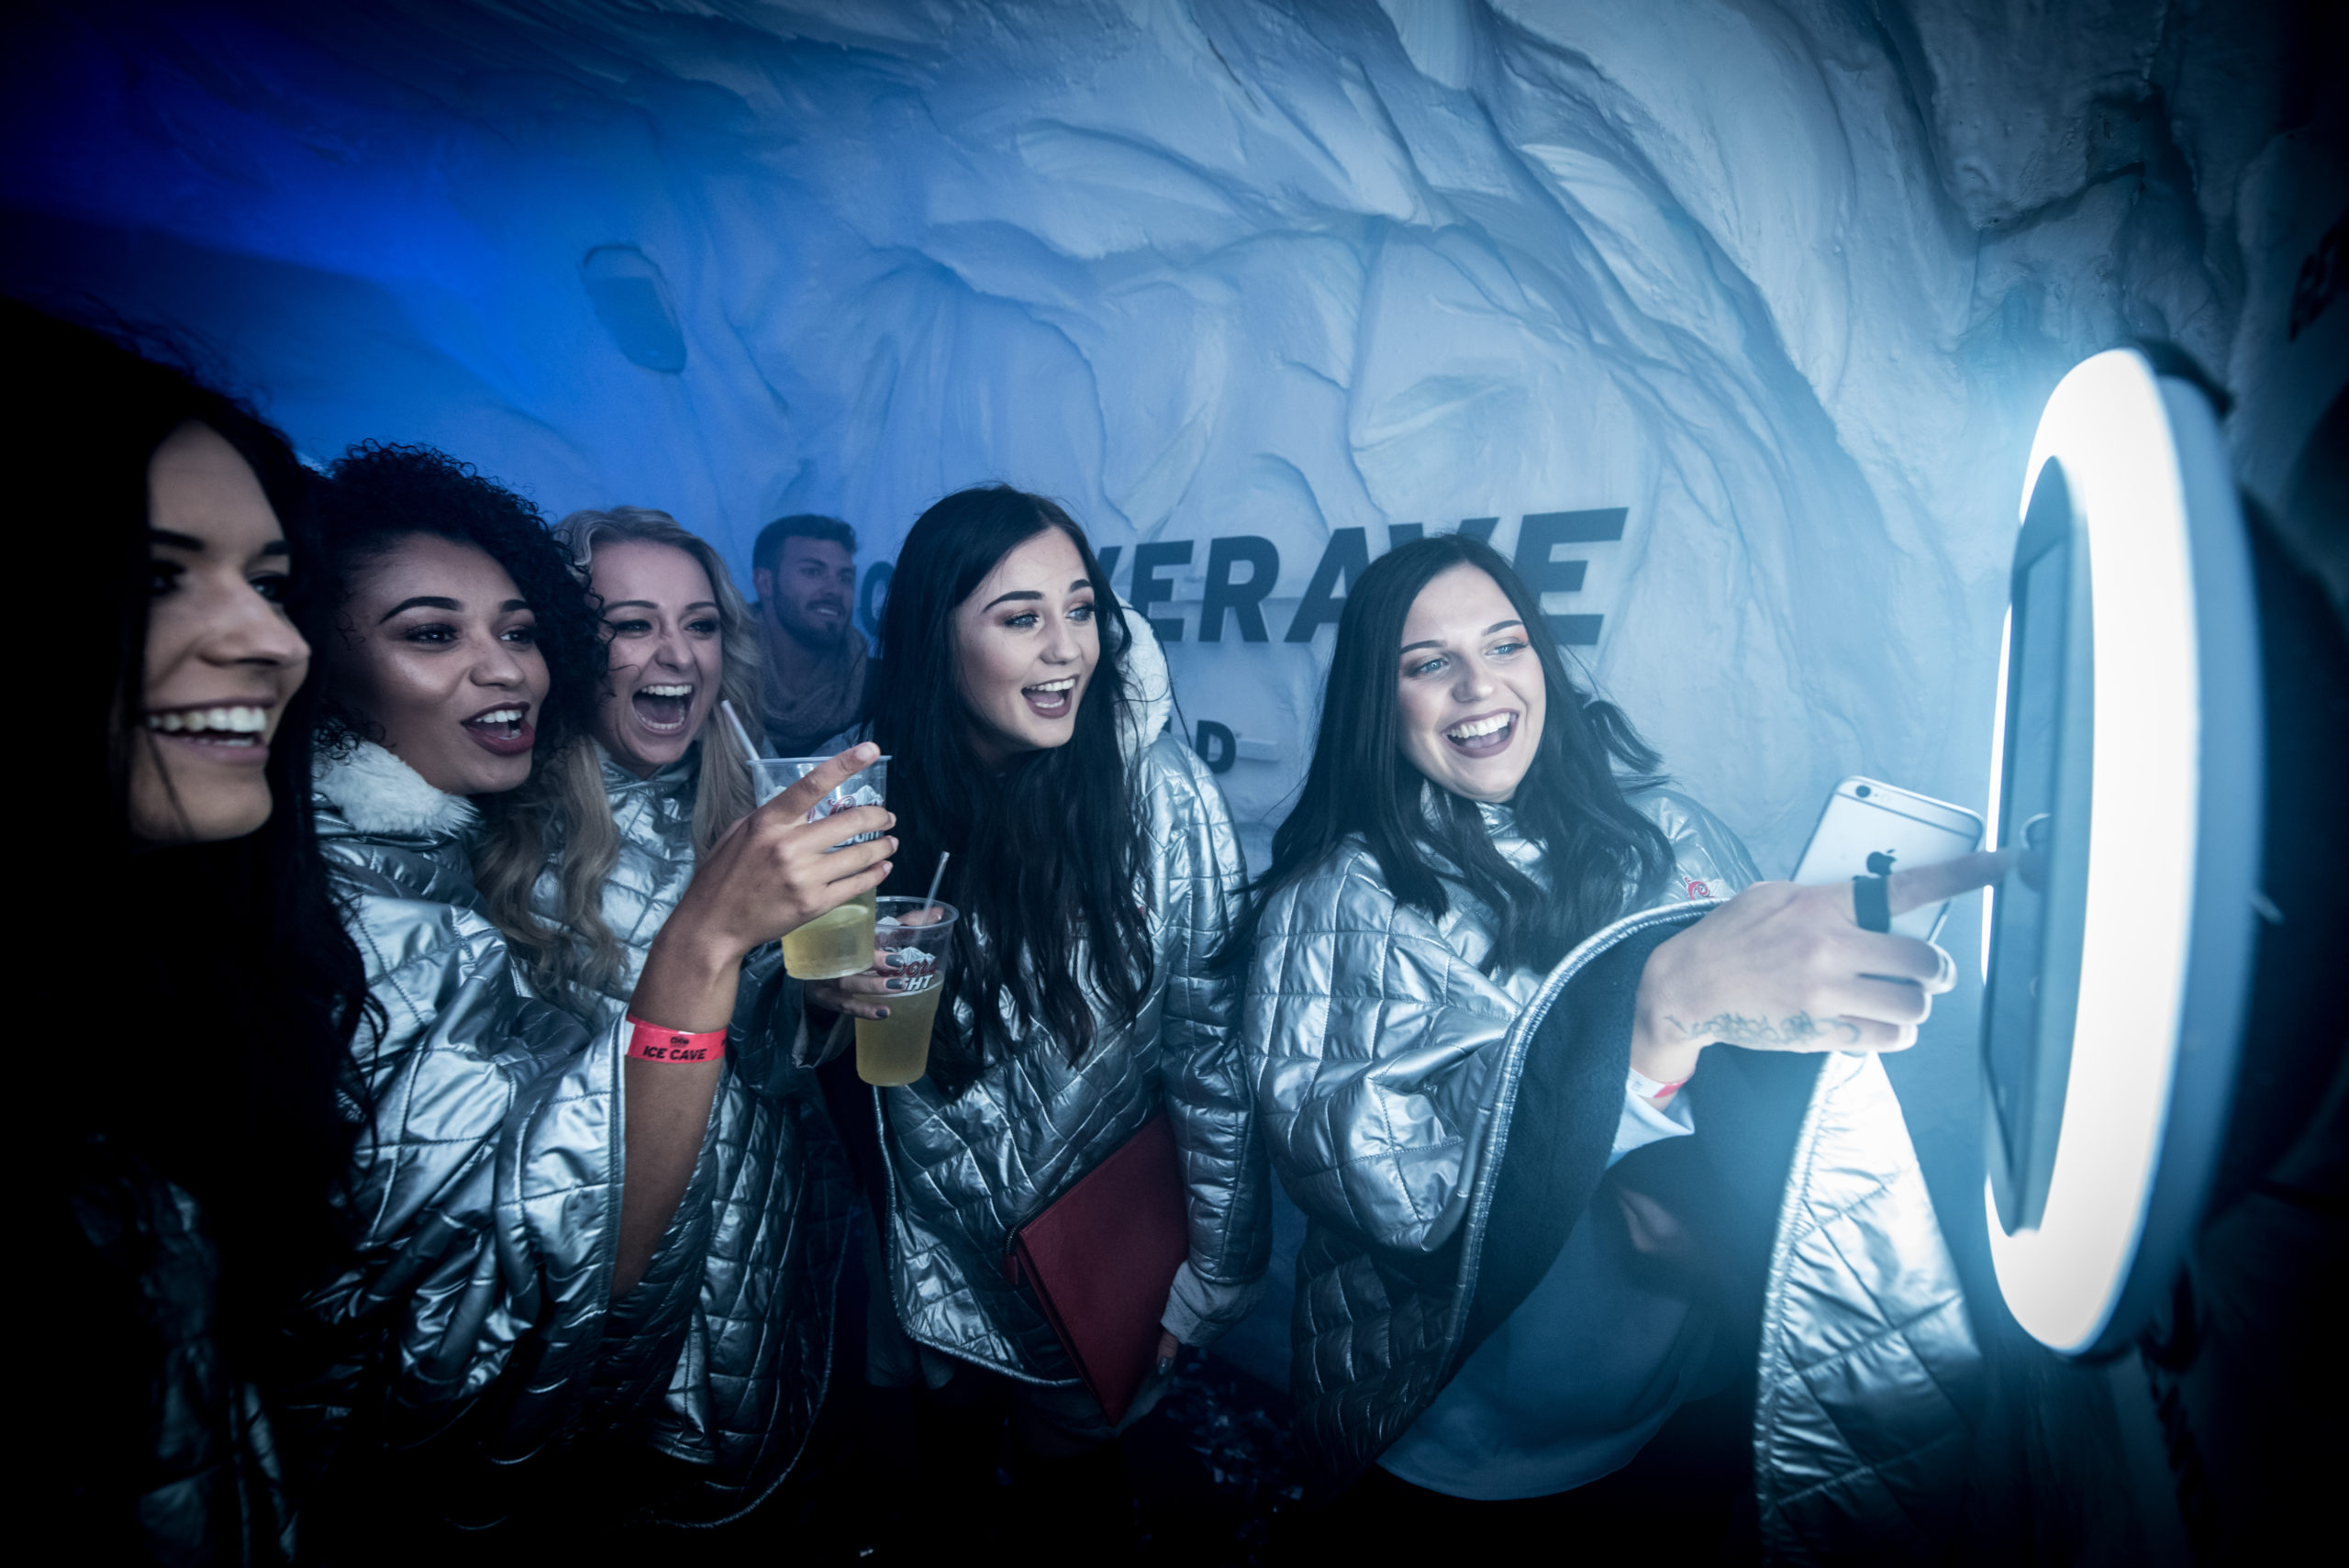 Coors Light Ice cave rave experiential activation 6